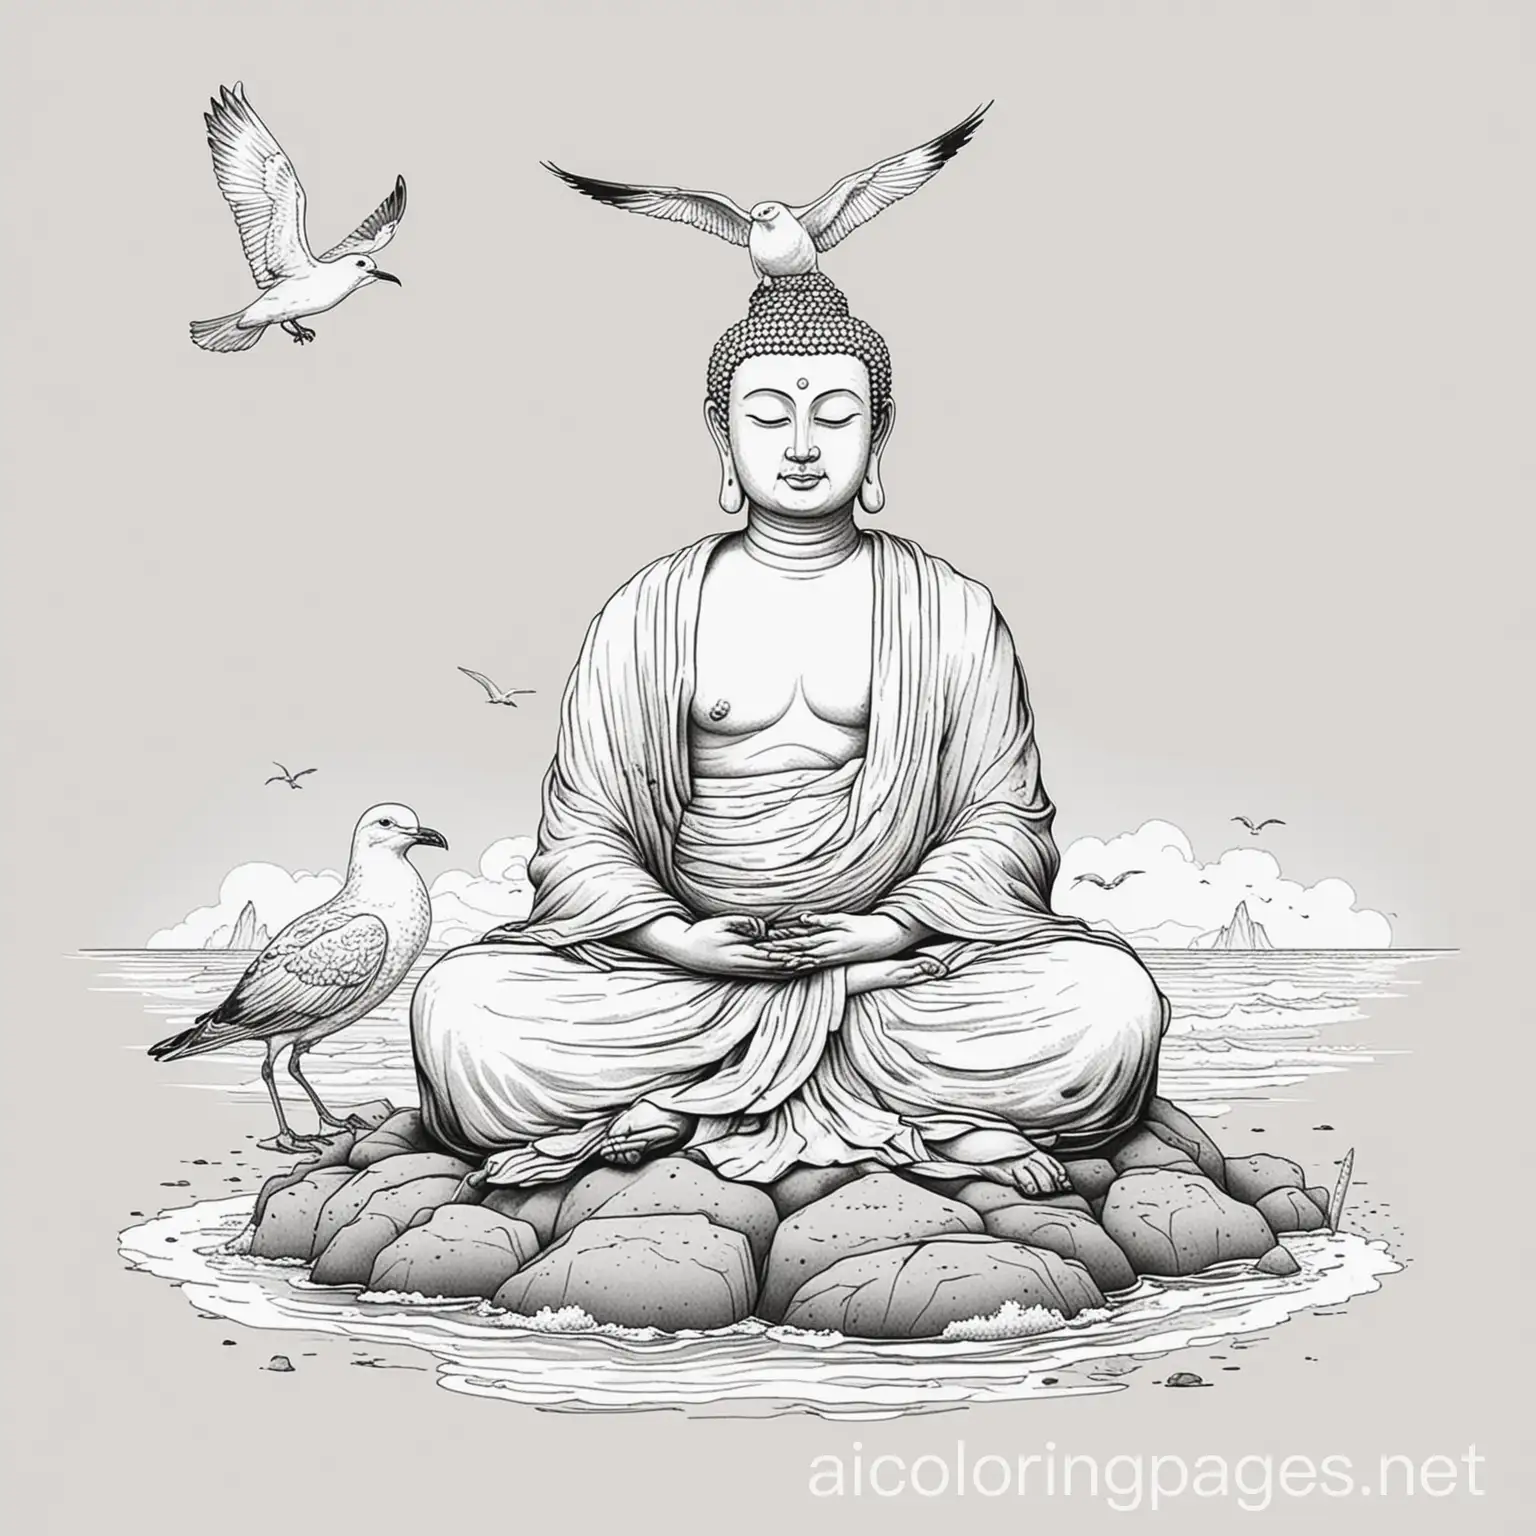 a buddha sitting on a beach with a seagull on his head, Coloring Page, black and white, line art, white background, Simplicity, Ample White Space. The background of the coloring page is plain white to make it easy for young children to color within the lines. The outlines of all the subjects are easy to distinguish, making it simple for kids to color without too much difficulty